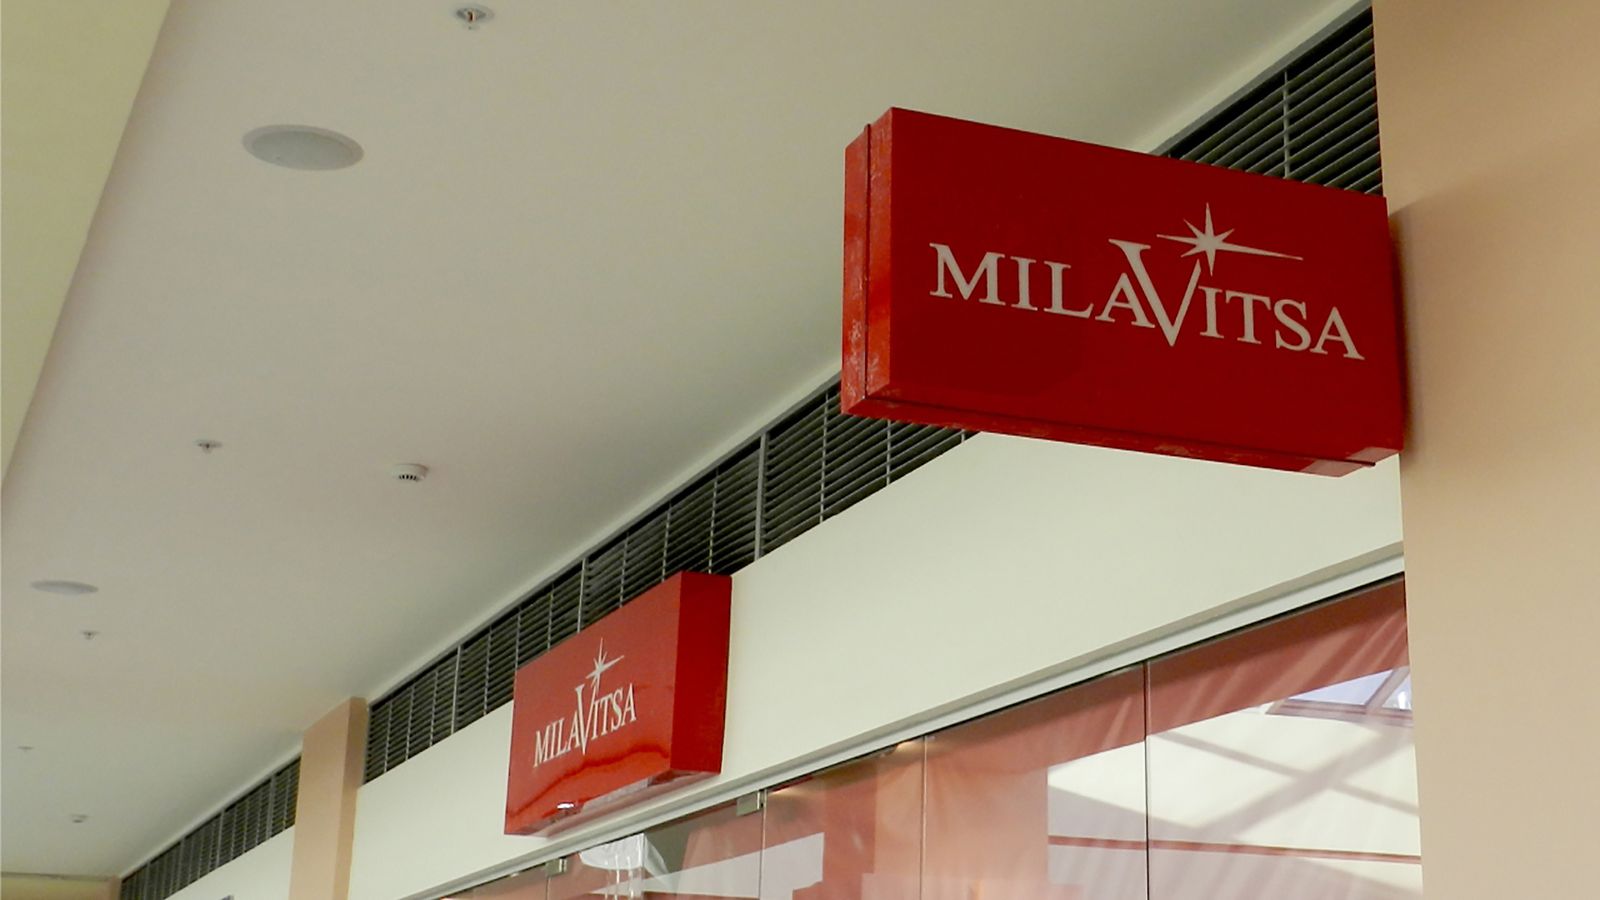 MILAVISTA indoor acrylic light boxes in red color fixed to the wall for storefront branding